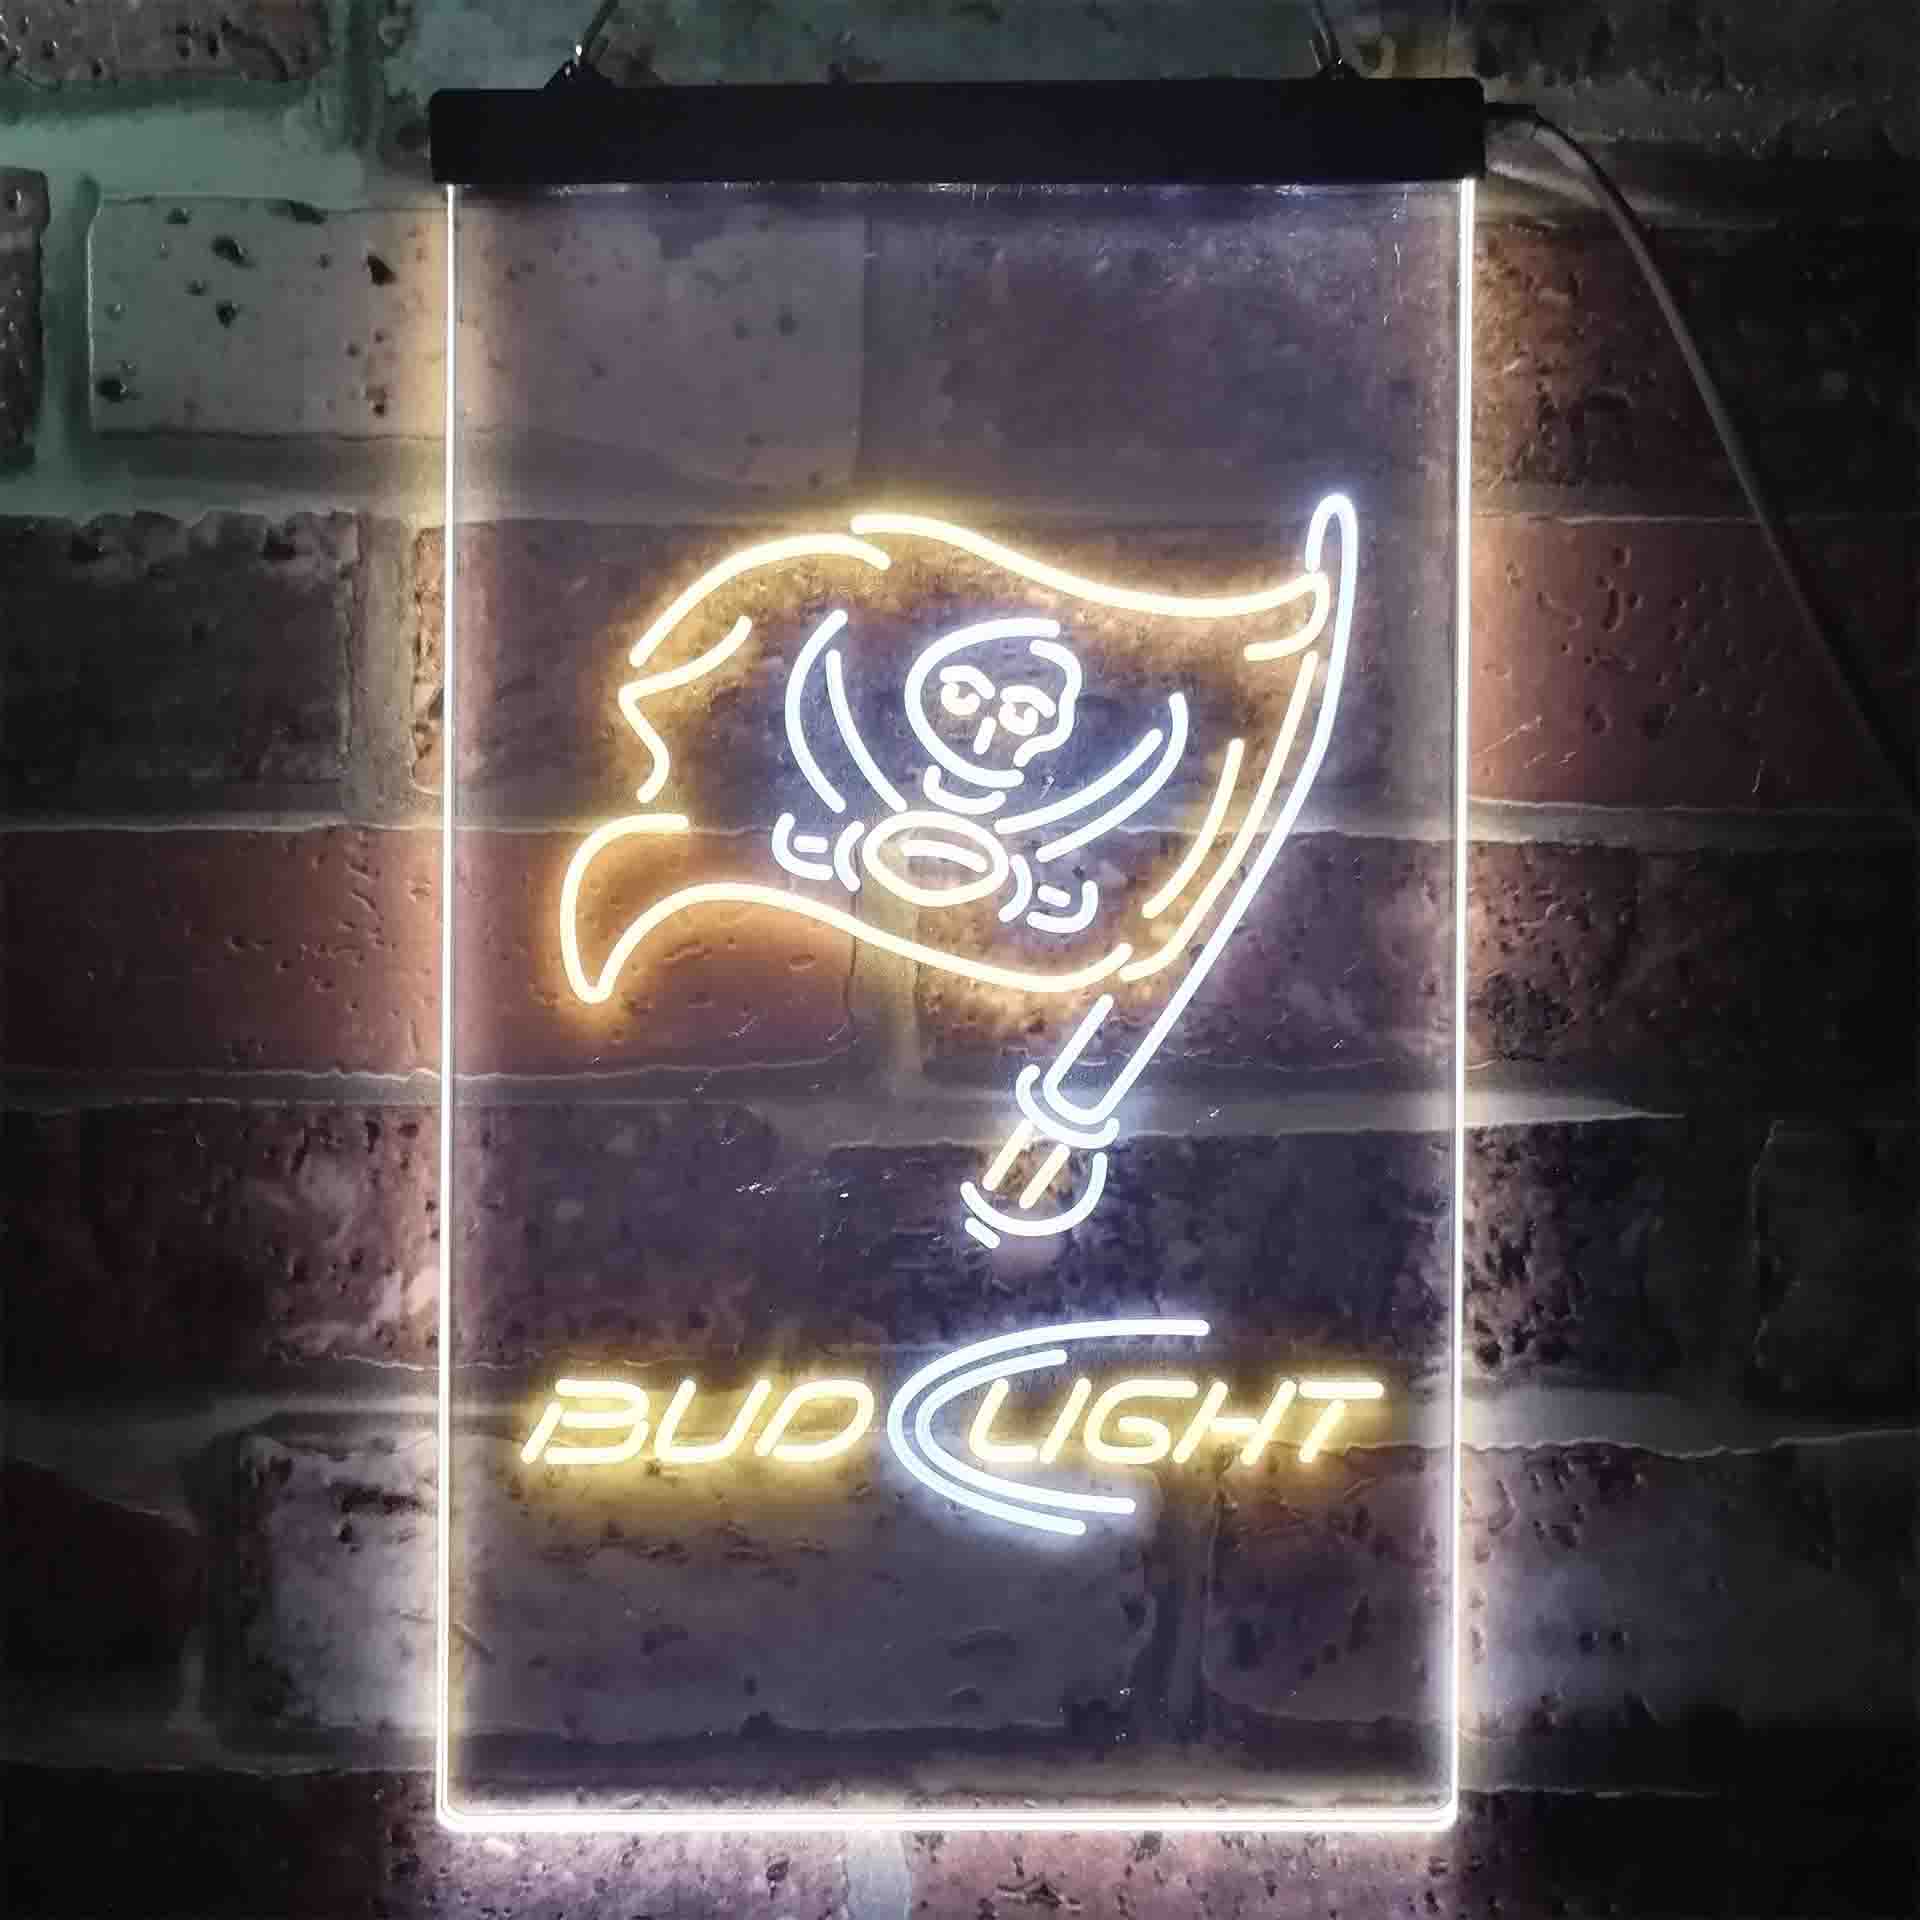 Tampa Bay Buccaneers Bud Light LED Neon Sign